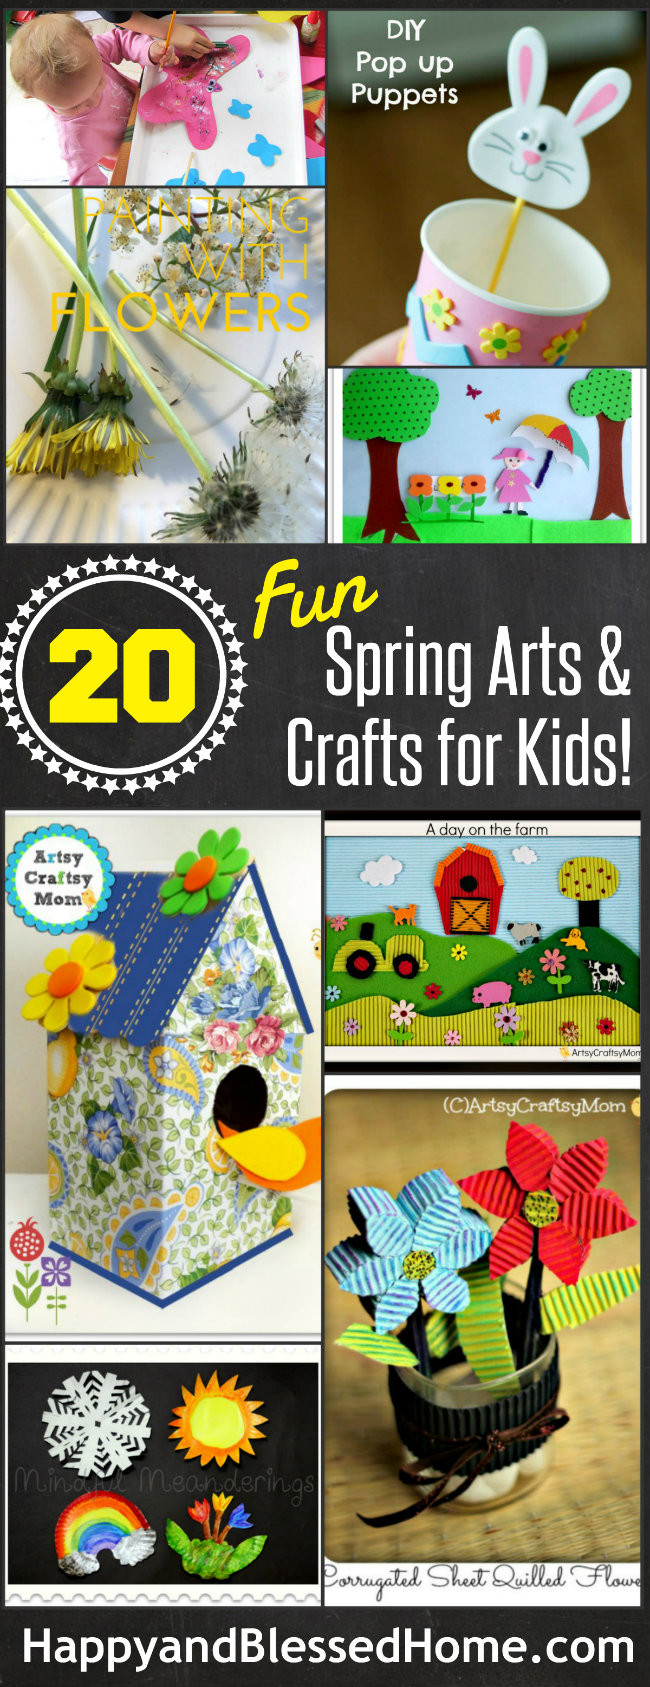 Toddler Arts And Craft Ideas
 The Ultimate List of 20 Spring Arts and Crafts for Kids